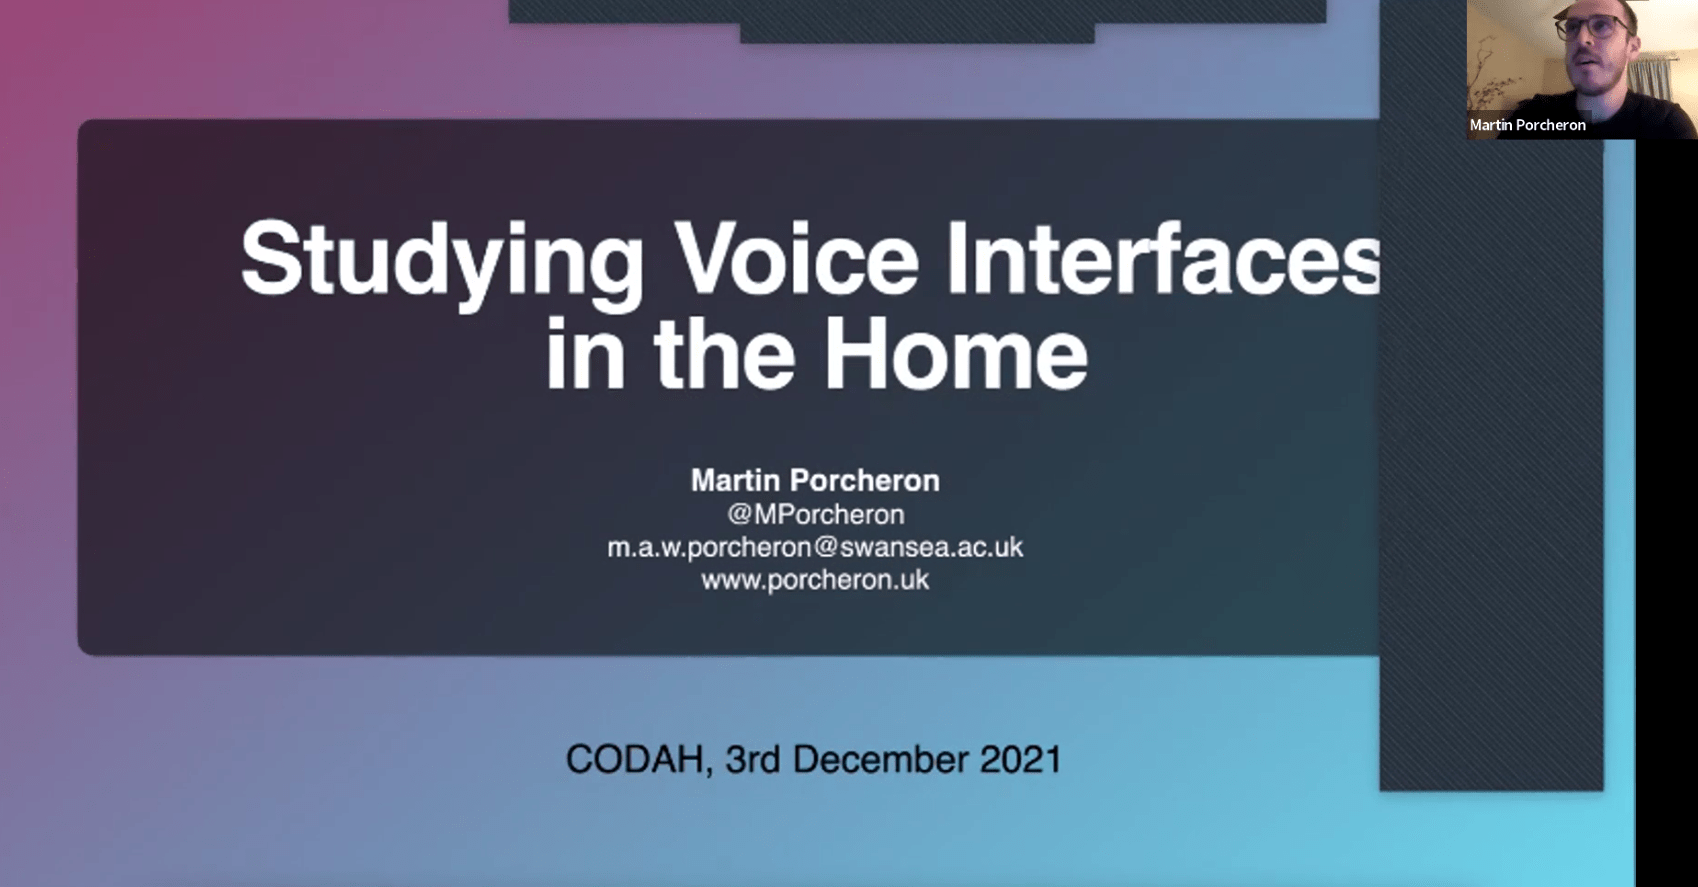 Studying Voice Interfaces in the Home: CODAH talk by Dr Martin Porcheron